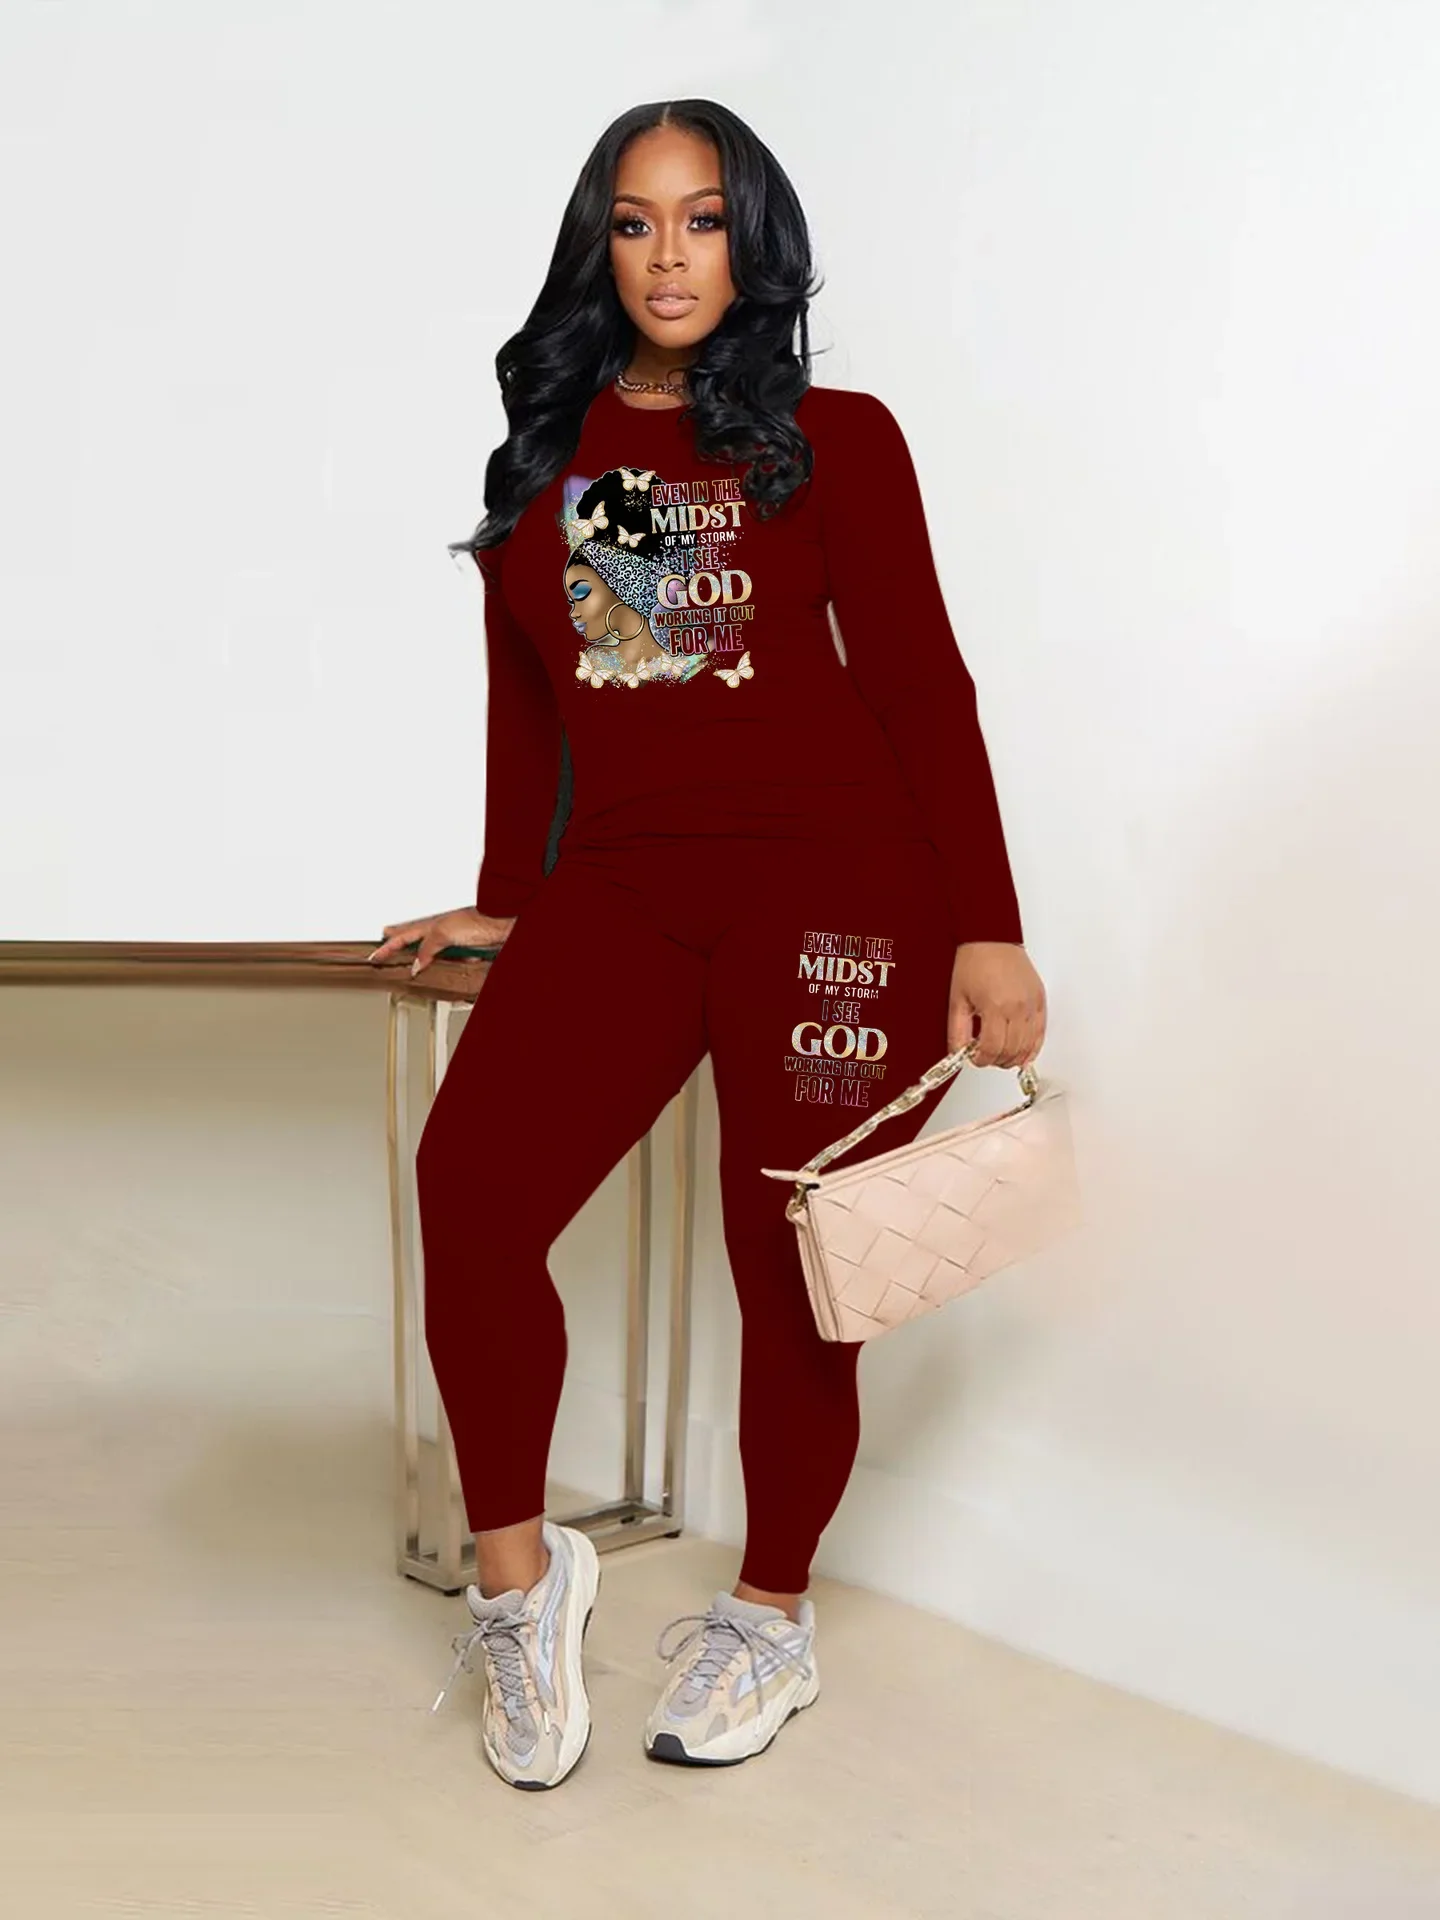 Women's Suit Autumn Fashion Athleisure Long Sleeve Top and Trousers Two Piece Set Printing O-Neck 2 Piece Sets Womens Outfits new men hawaiian sets summer golden horse printing beach short sleeve shirt shorts casual trip mens 2 piece suit s 3xl